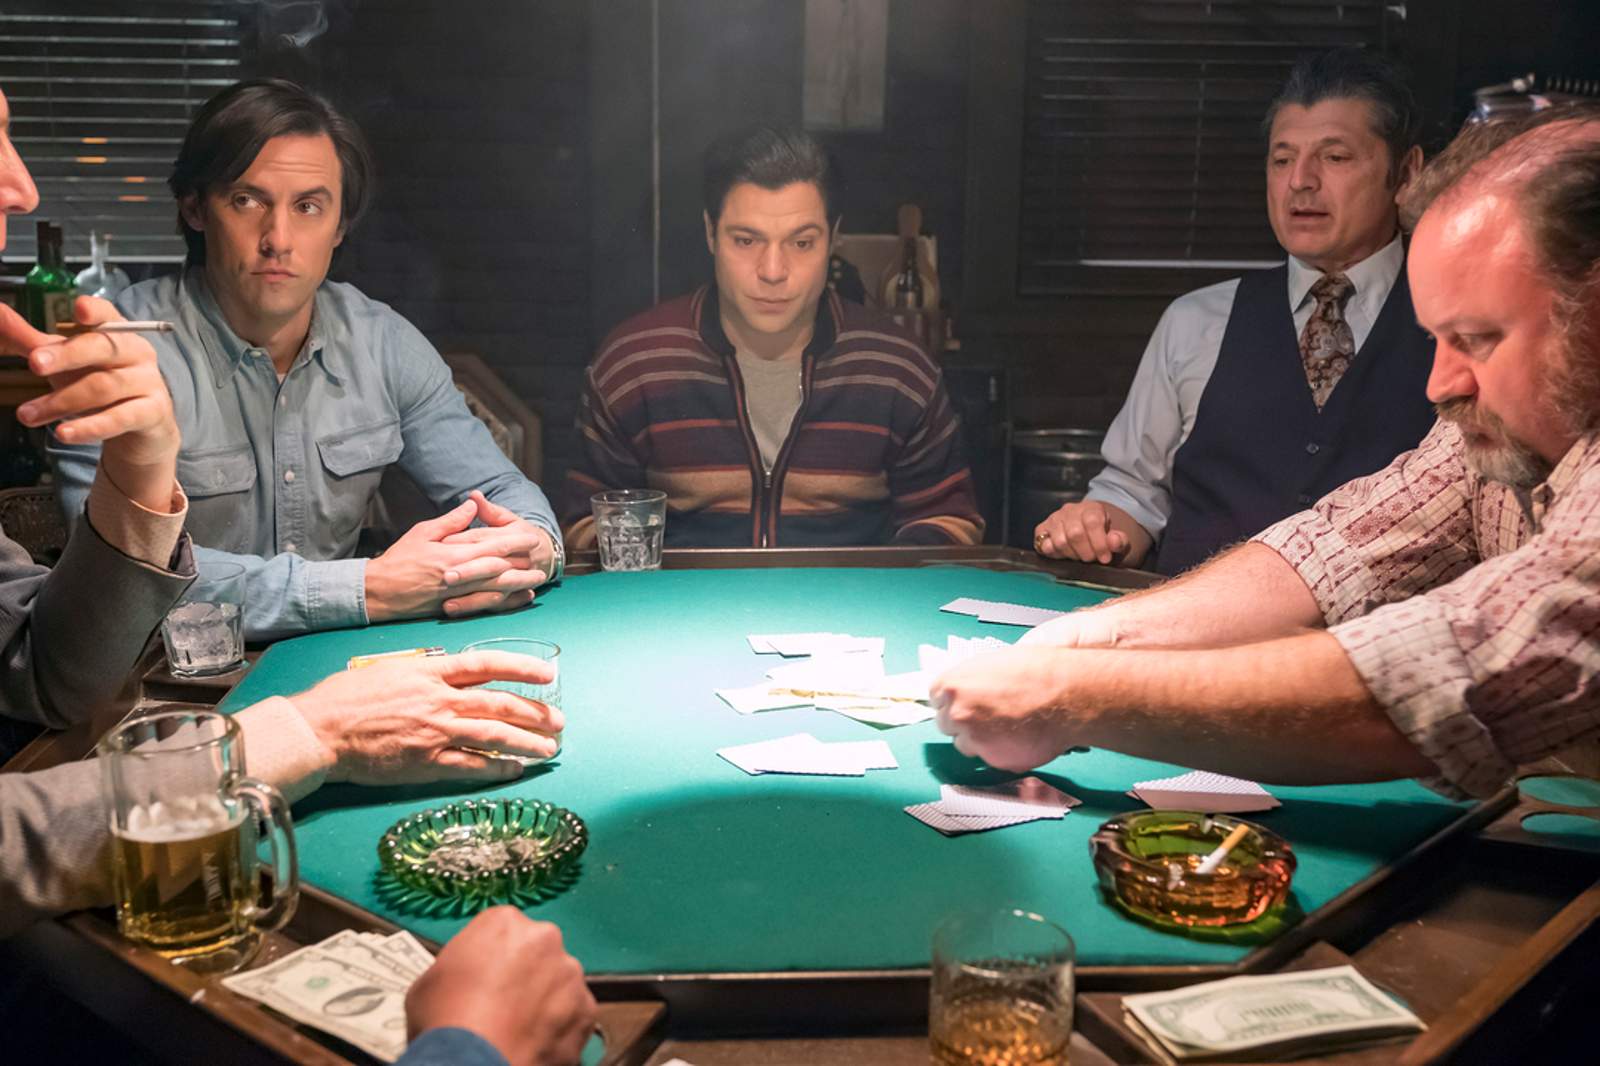 'This Is Us' Goes Dark & Gritty with Poker in Season Finale